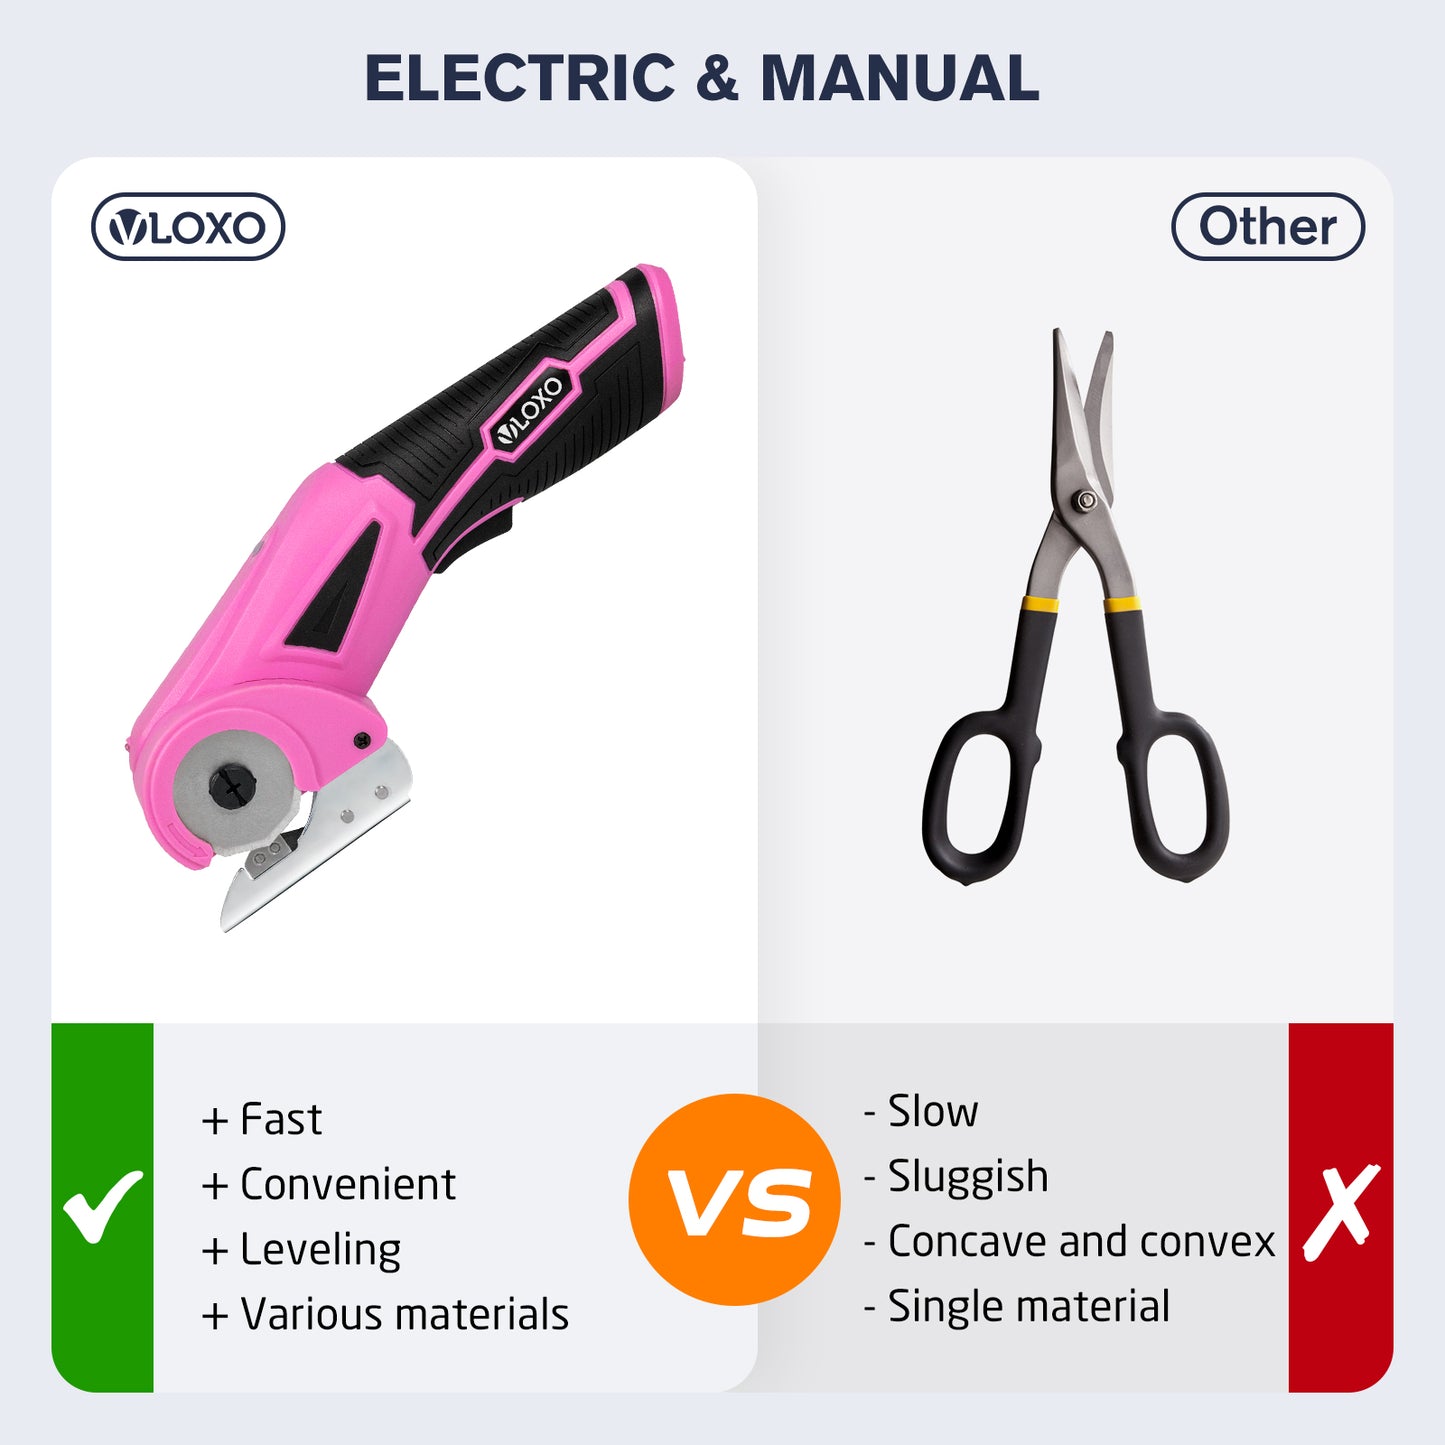 Pink Power Electric Fabric Cutter - Cordless Craft Scissors for